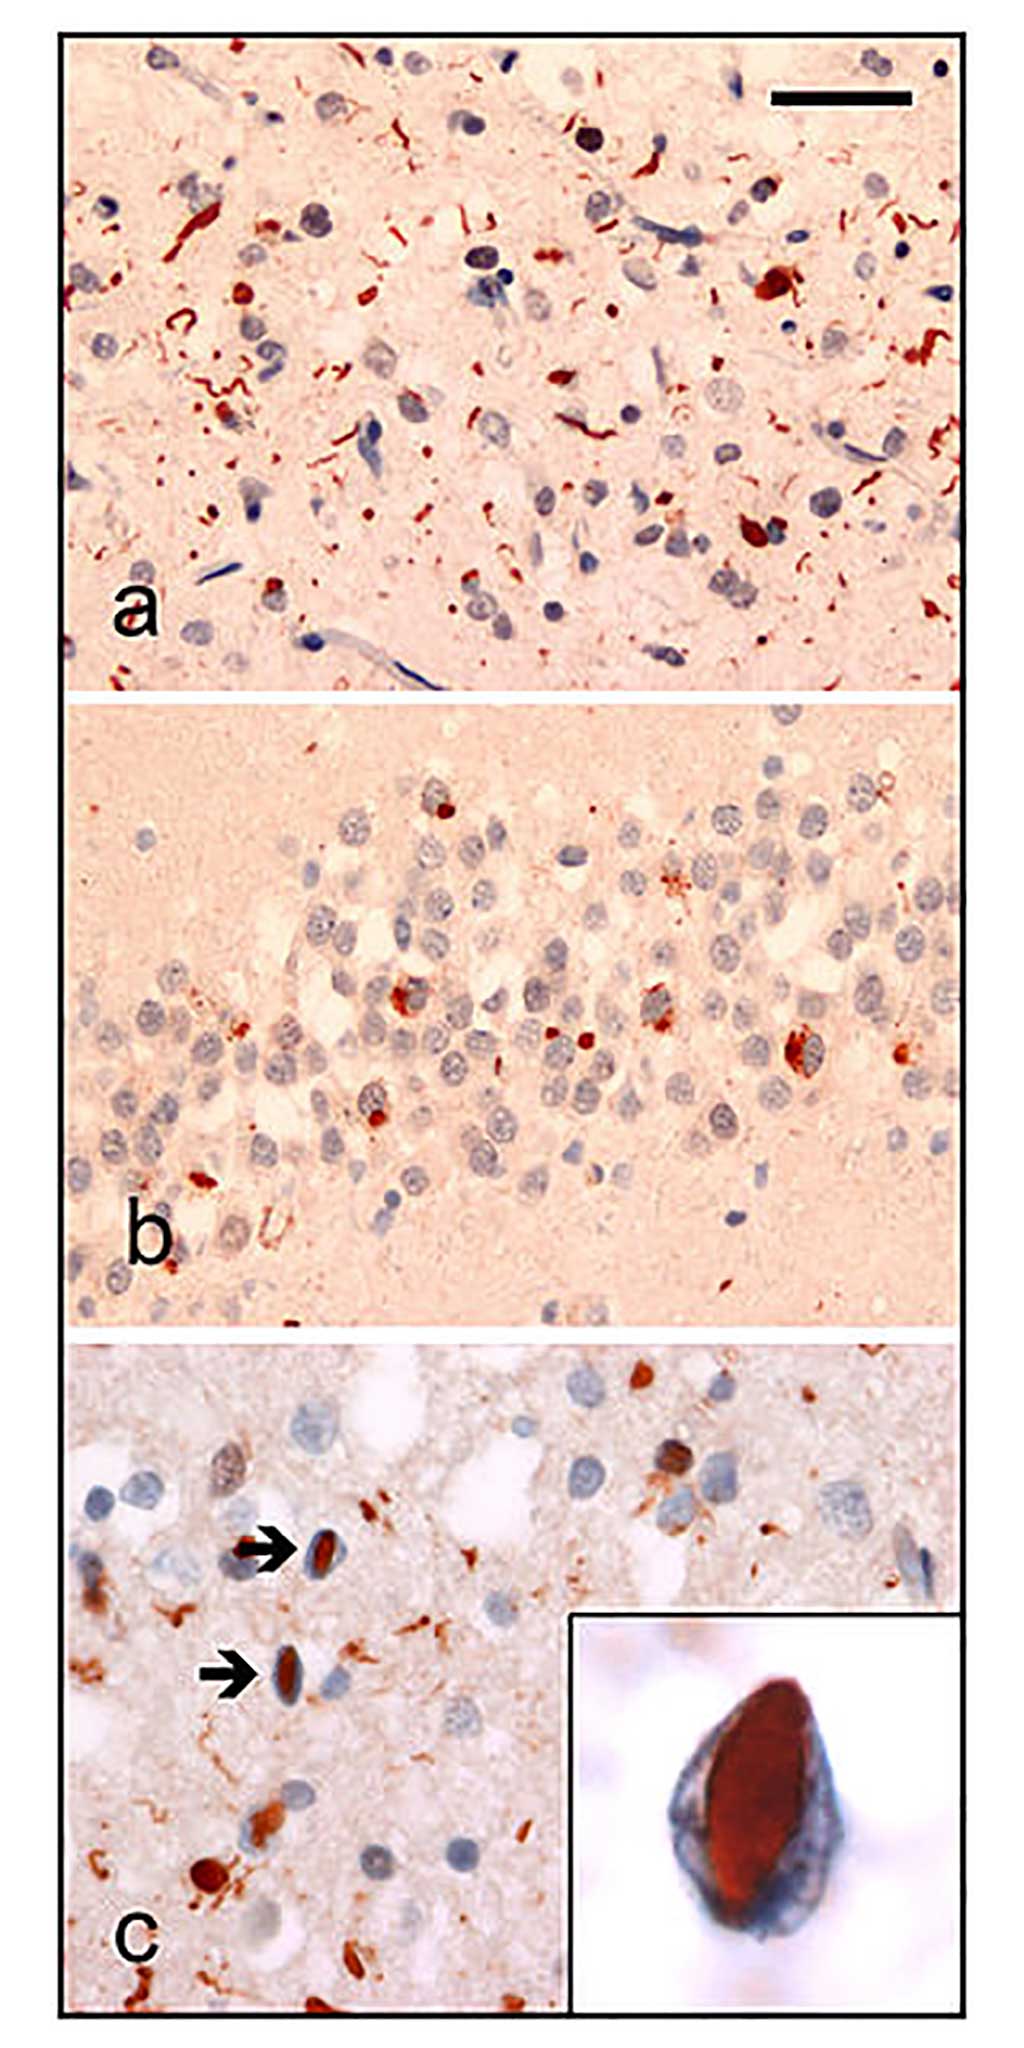 Image: Neuropathologic analysis of brain tissue from FTLD patients. Ubiquitin immunohistochemistry in cases of familial FTLD demonstrates staining of (a) neurites and neuronal cytoplasmic inclusions in the superficial cerebral neocortex, (b) neuronal cytoplasmic inclusions in hippocampal dentate granule cells, and (c) neuronal intranuclear inclusions in the cerebral neocortex (arrows). (Photo courtesy of Wikimedia Commons)